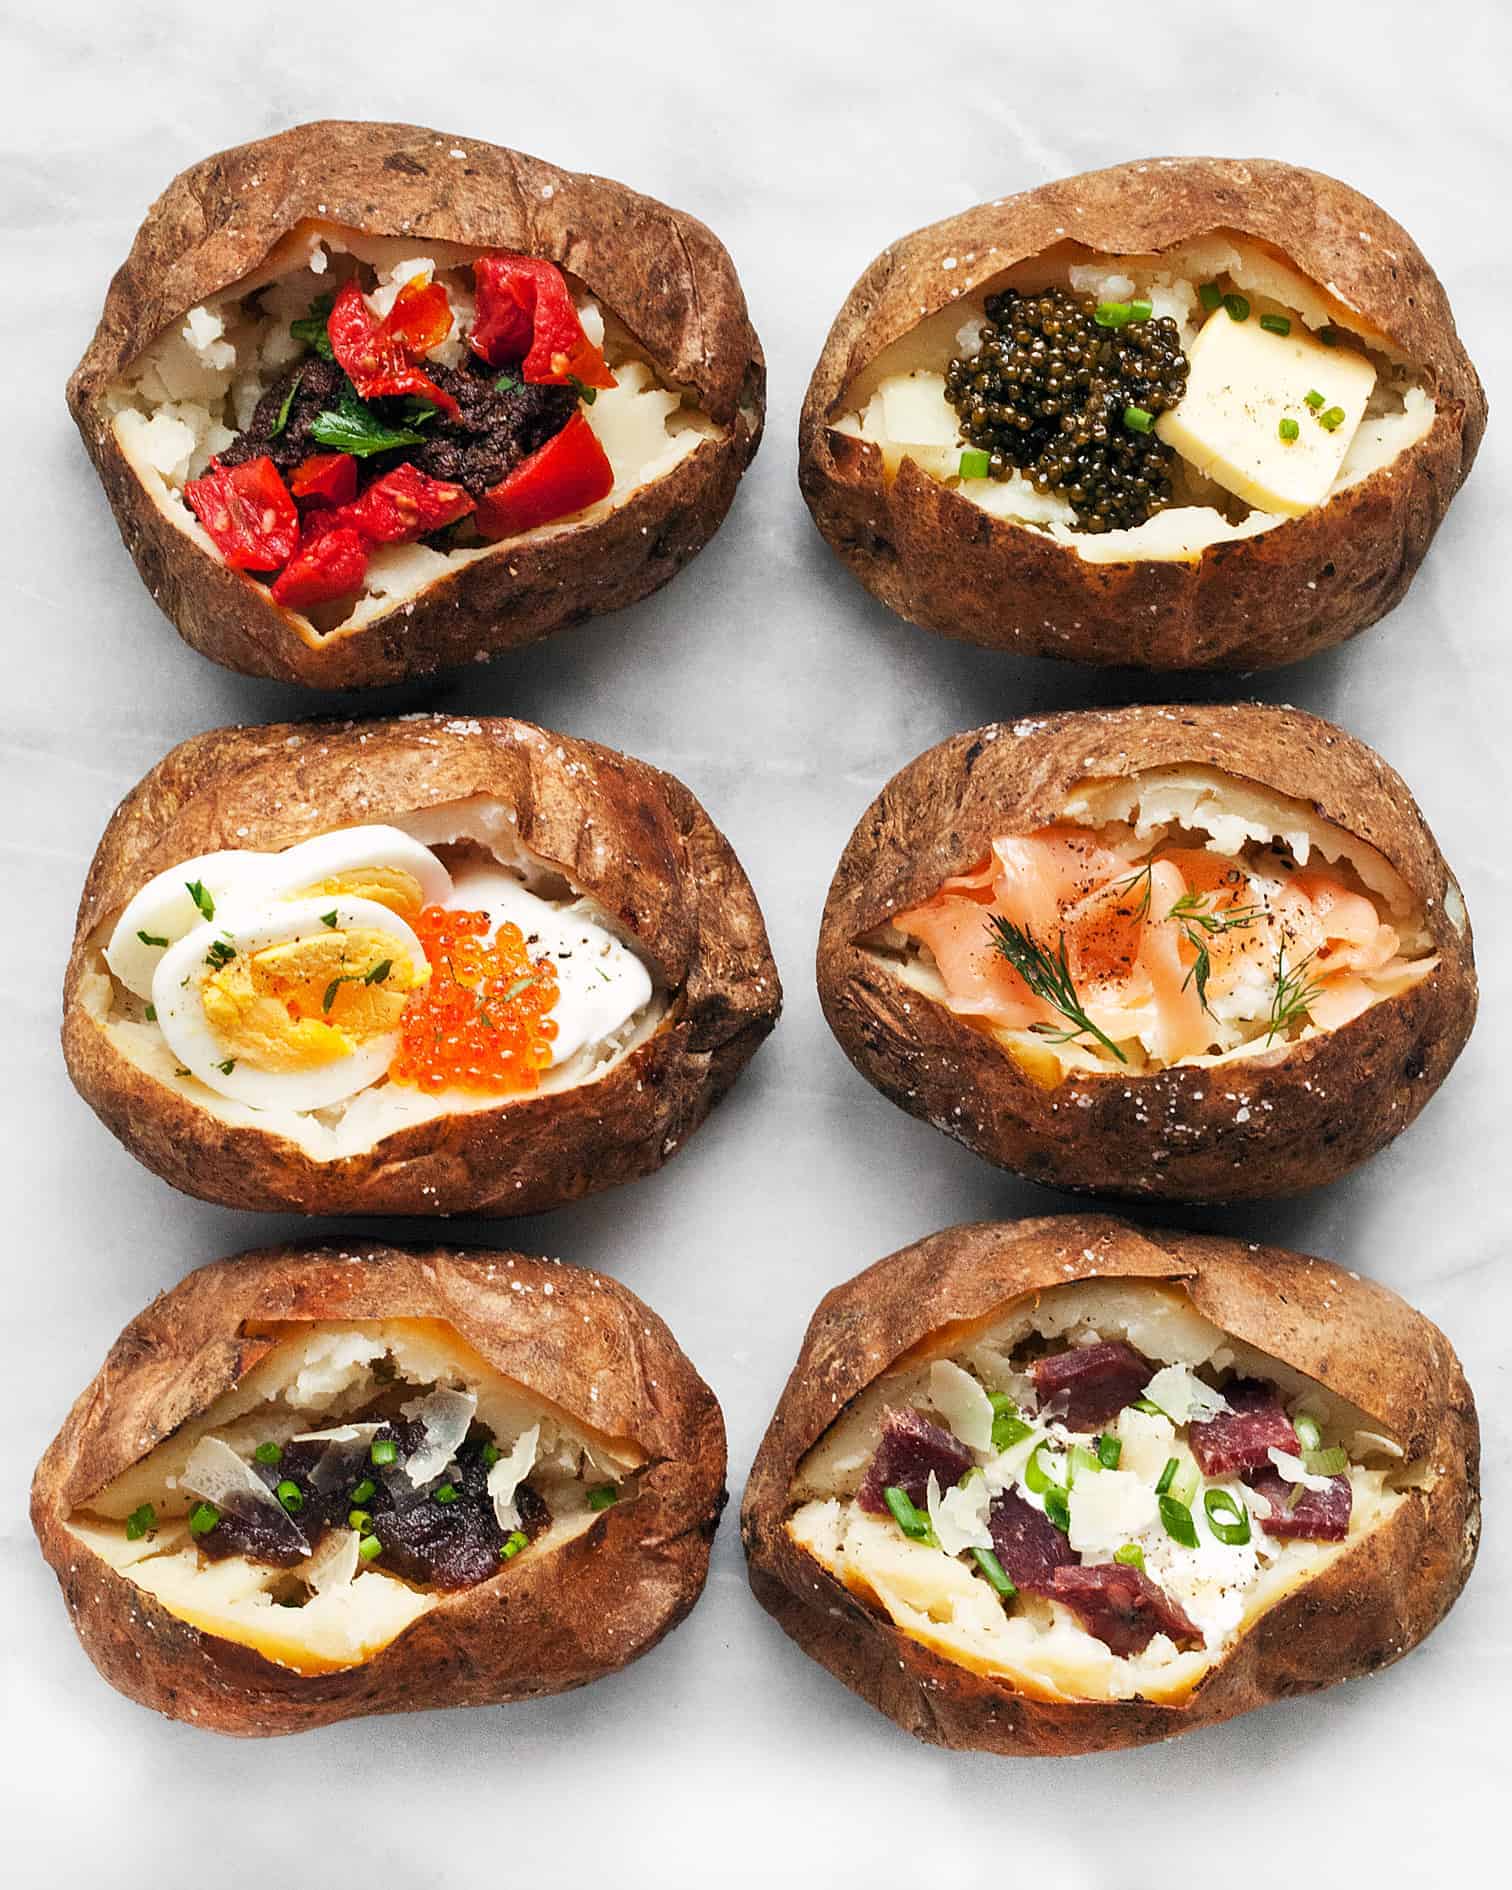 6 baked potatoes all with different toppings.